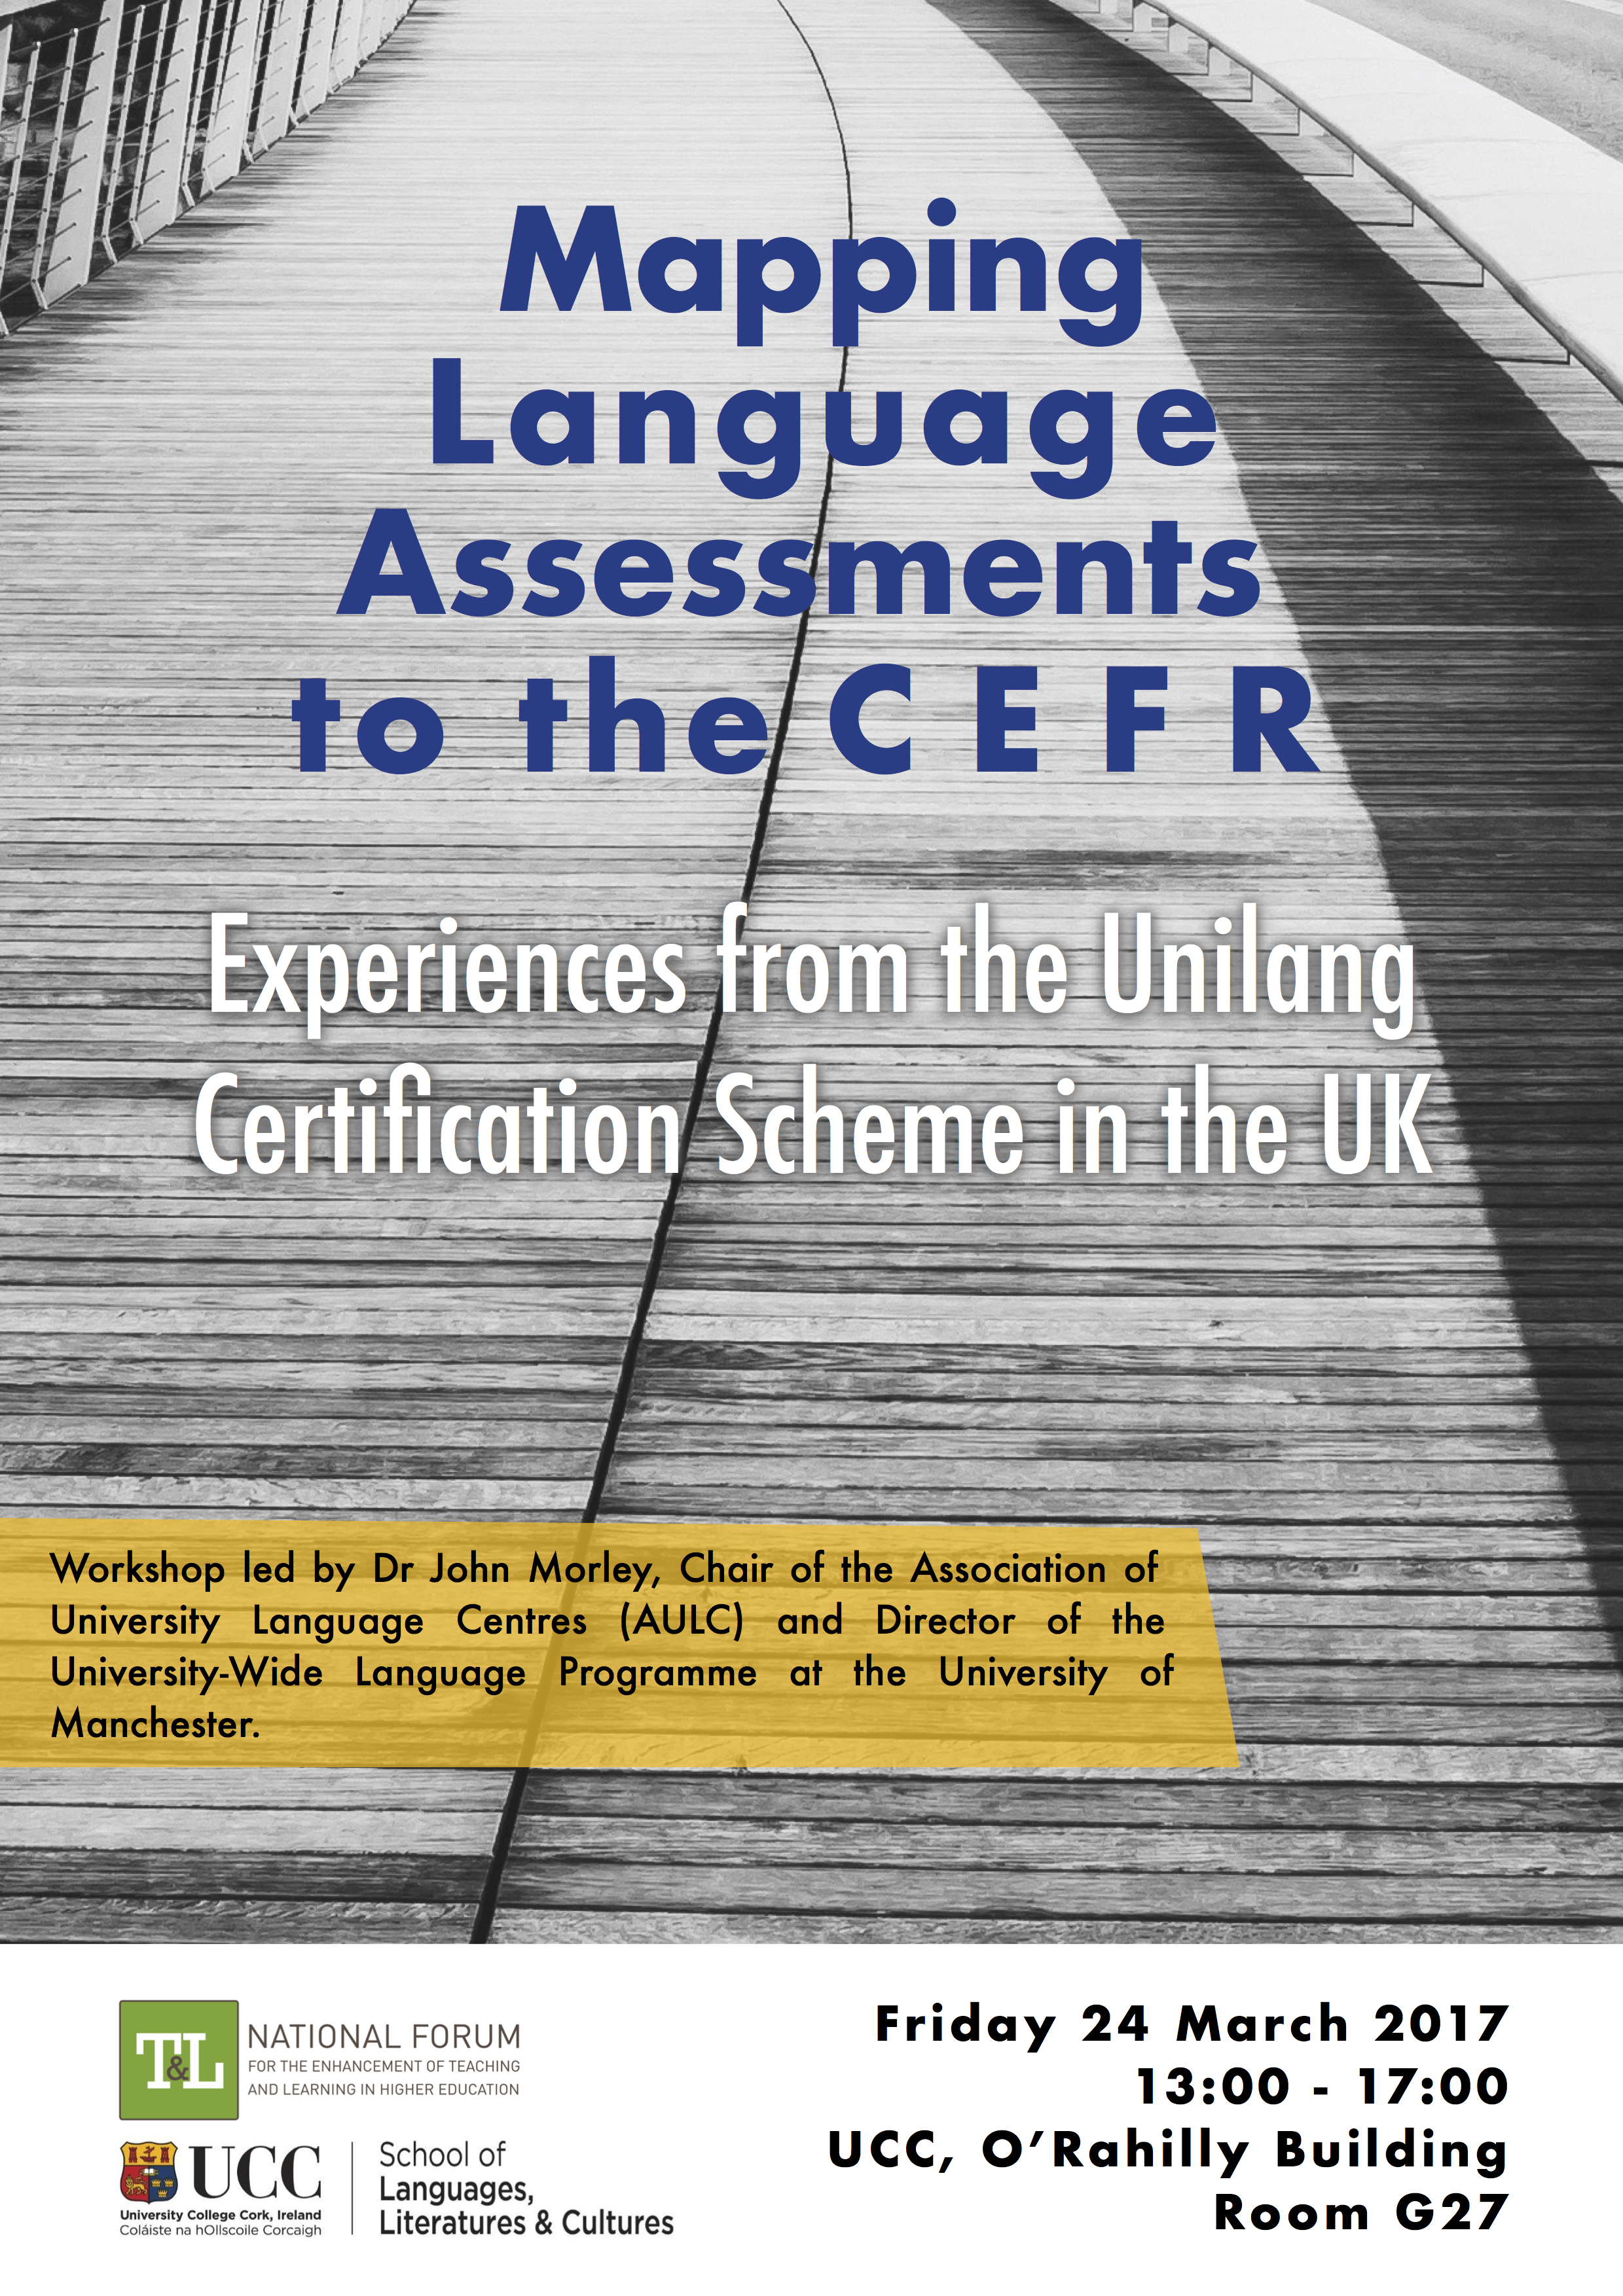 Mapping Language Assessments to the CEFR